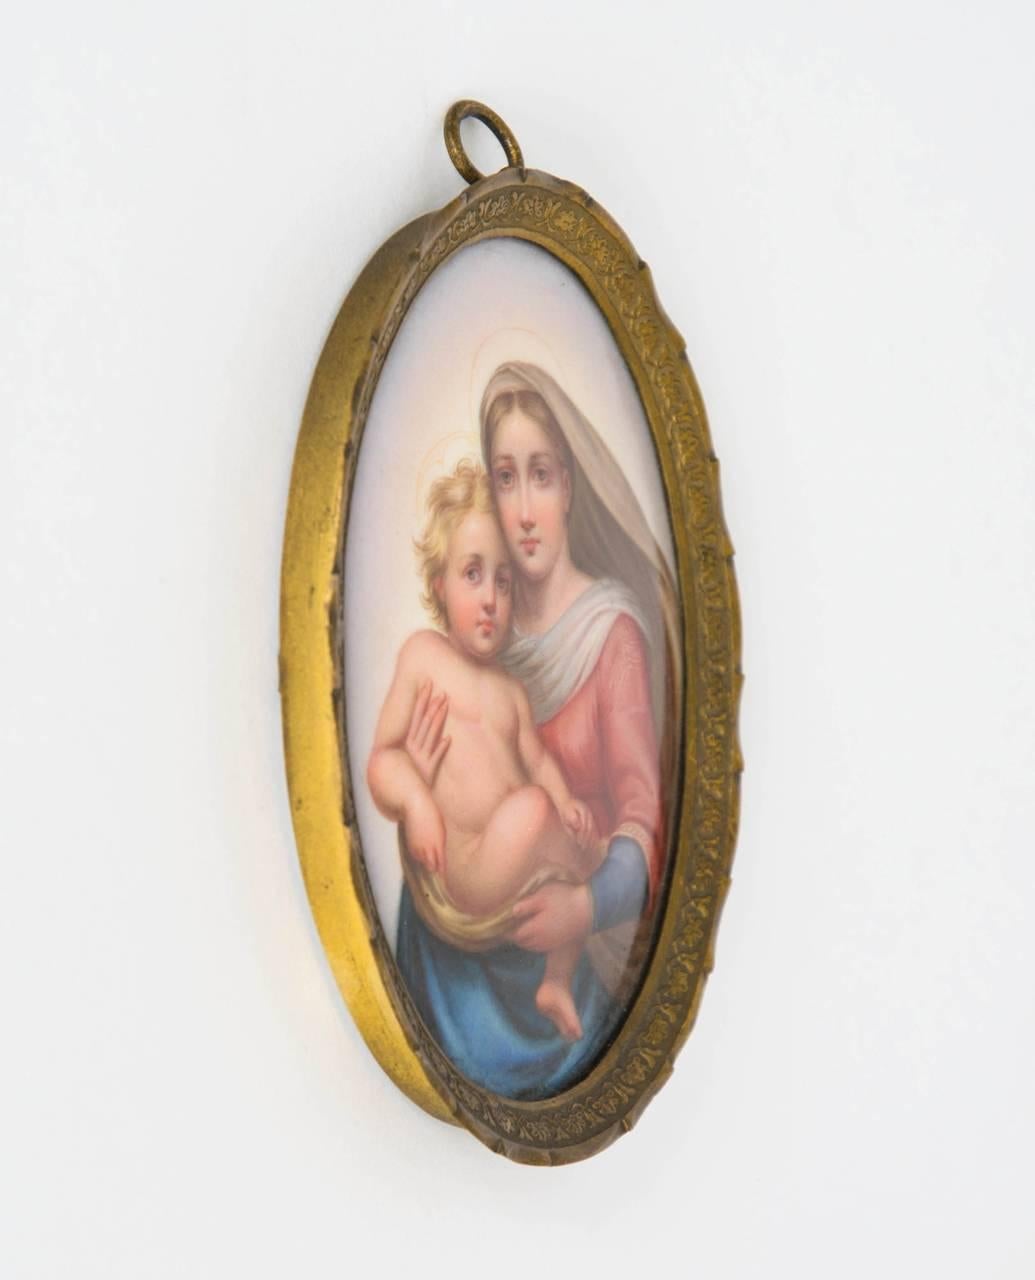 This charming miniature porcelain plaque depicts the Sistine Madonna after Raphael's famous Renaissance masterpiece of 1513. The oval plaque is set in a gilt frame, and bears the Meissen mark of crossed swords to the reverse.